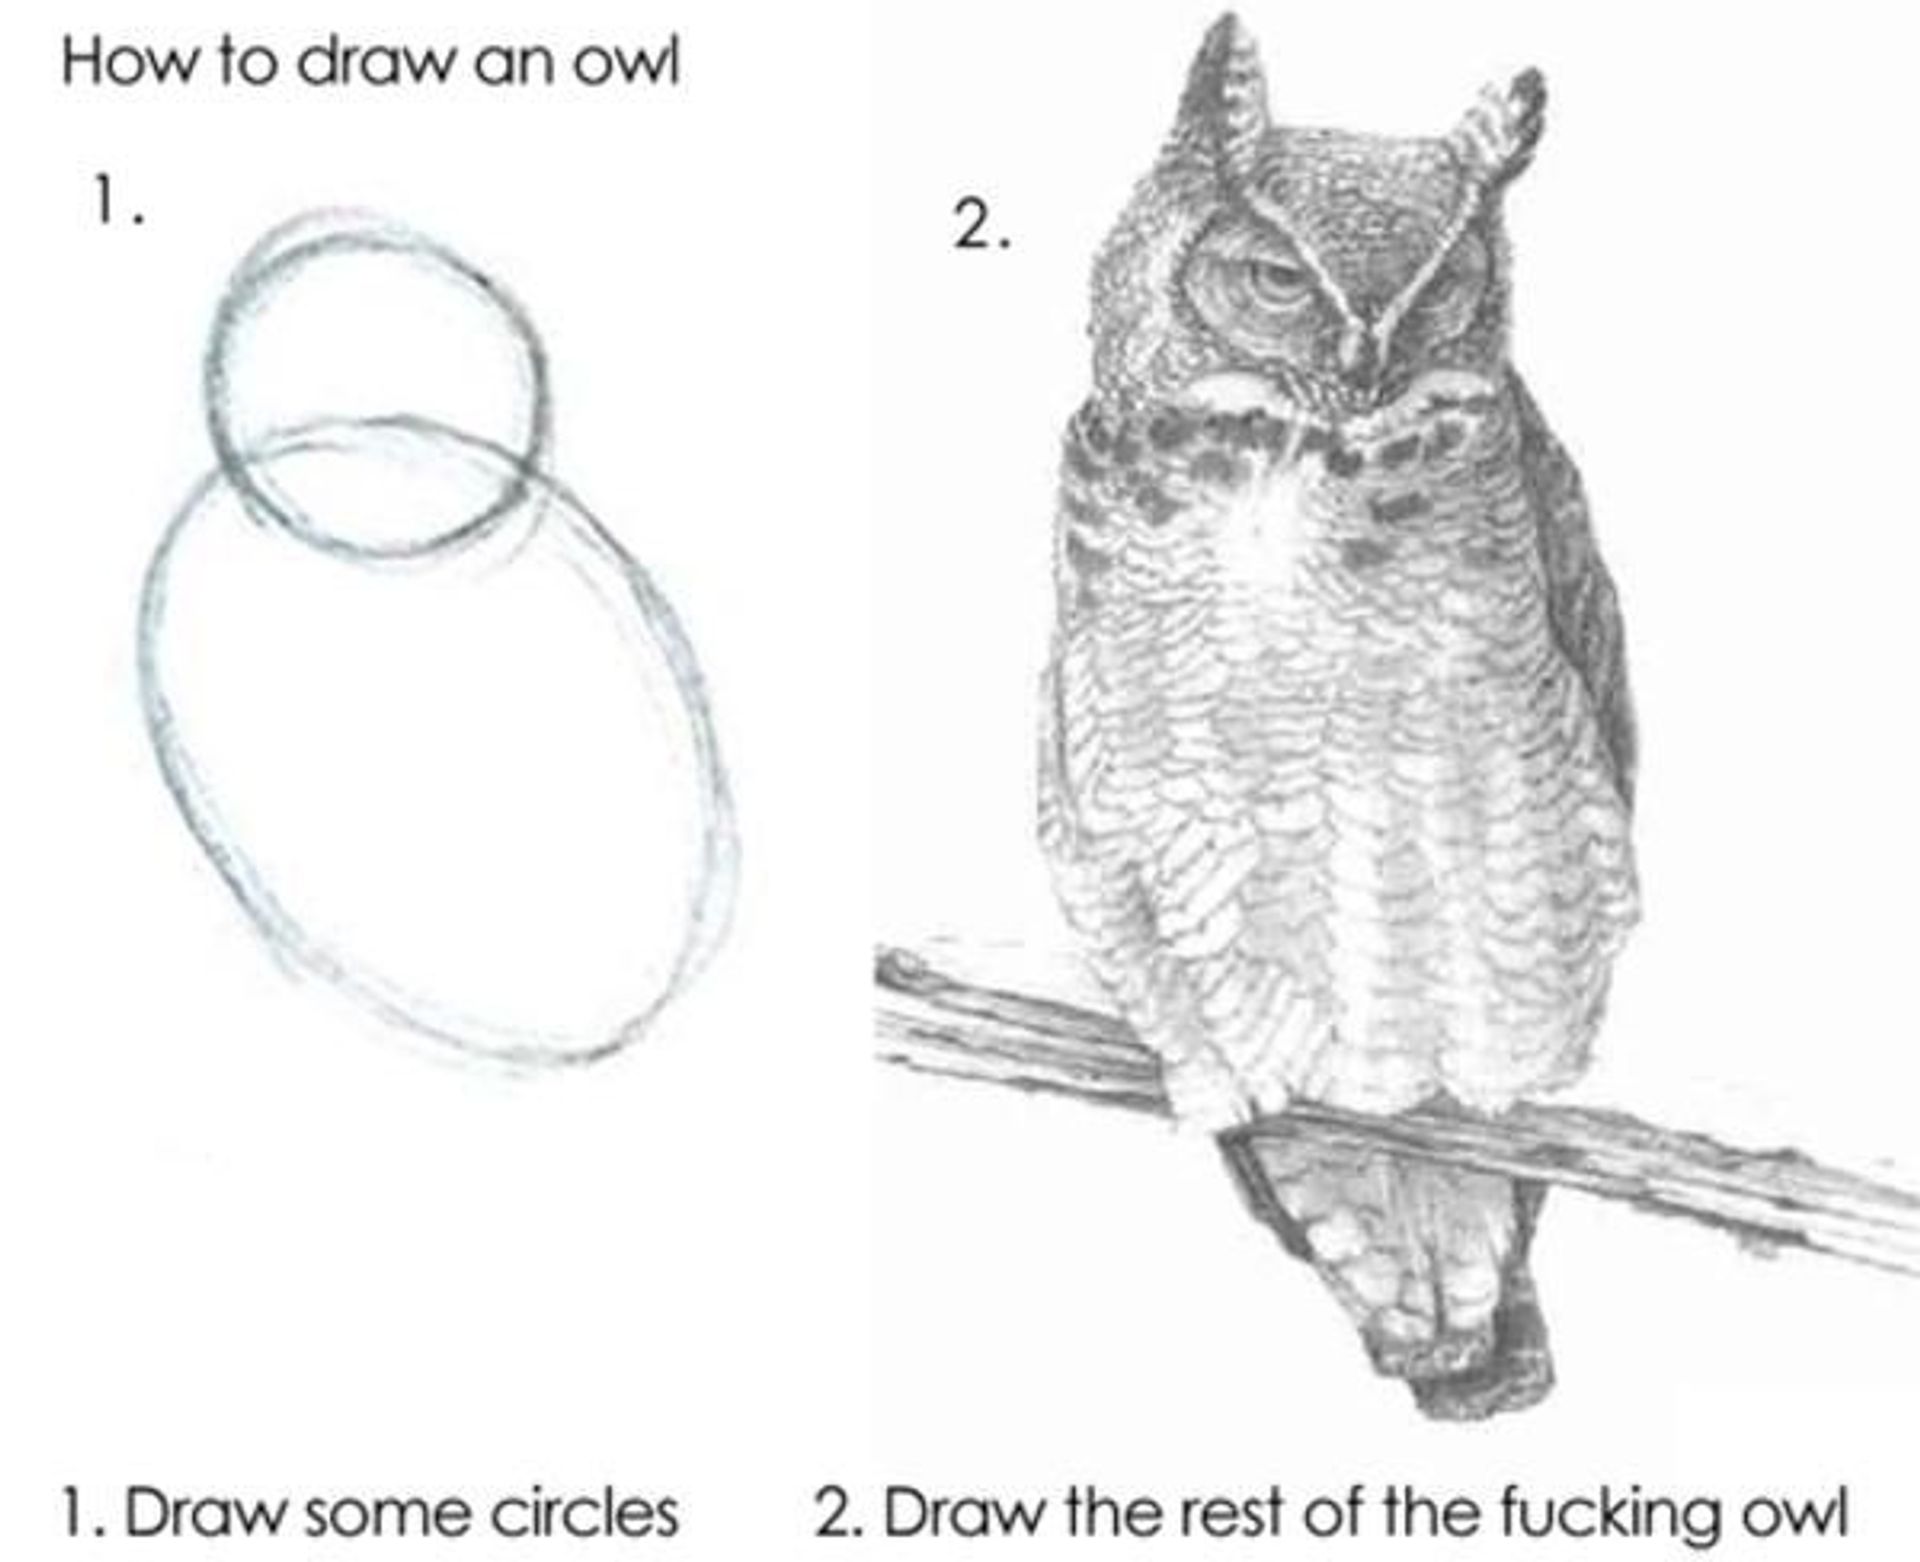 Visualization of how to draw an owl. First picture: two circles labeled "1. Draw some circles". Second picture: Picture of an own labeled "2. Draw the rest of the fucking owl"